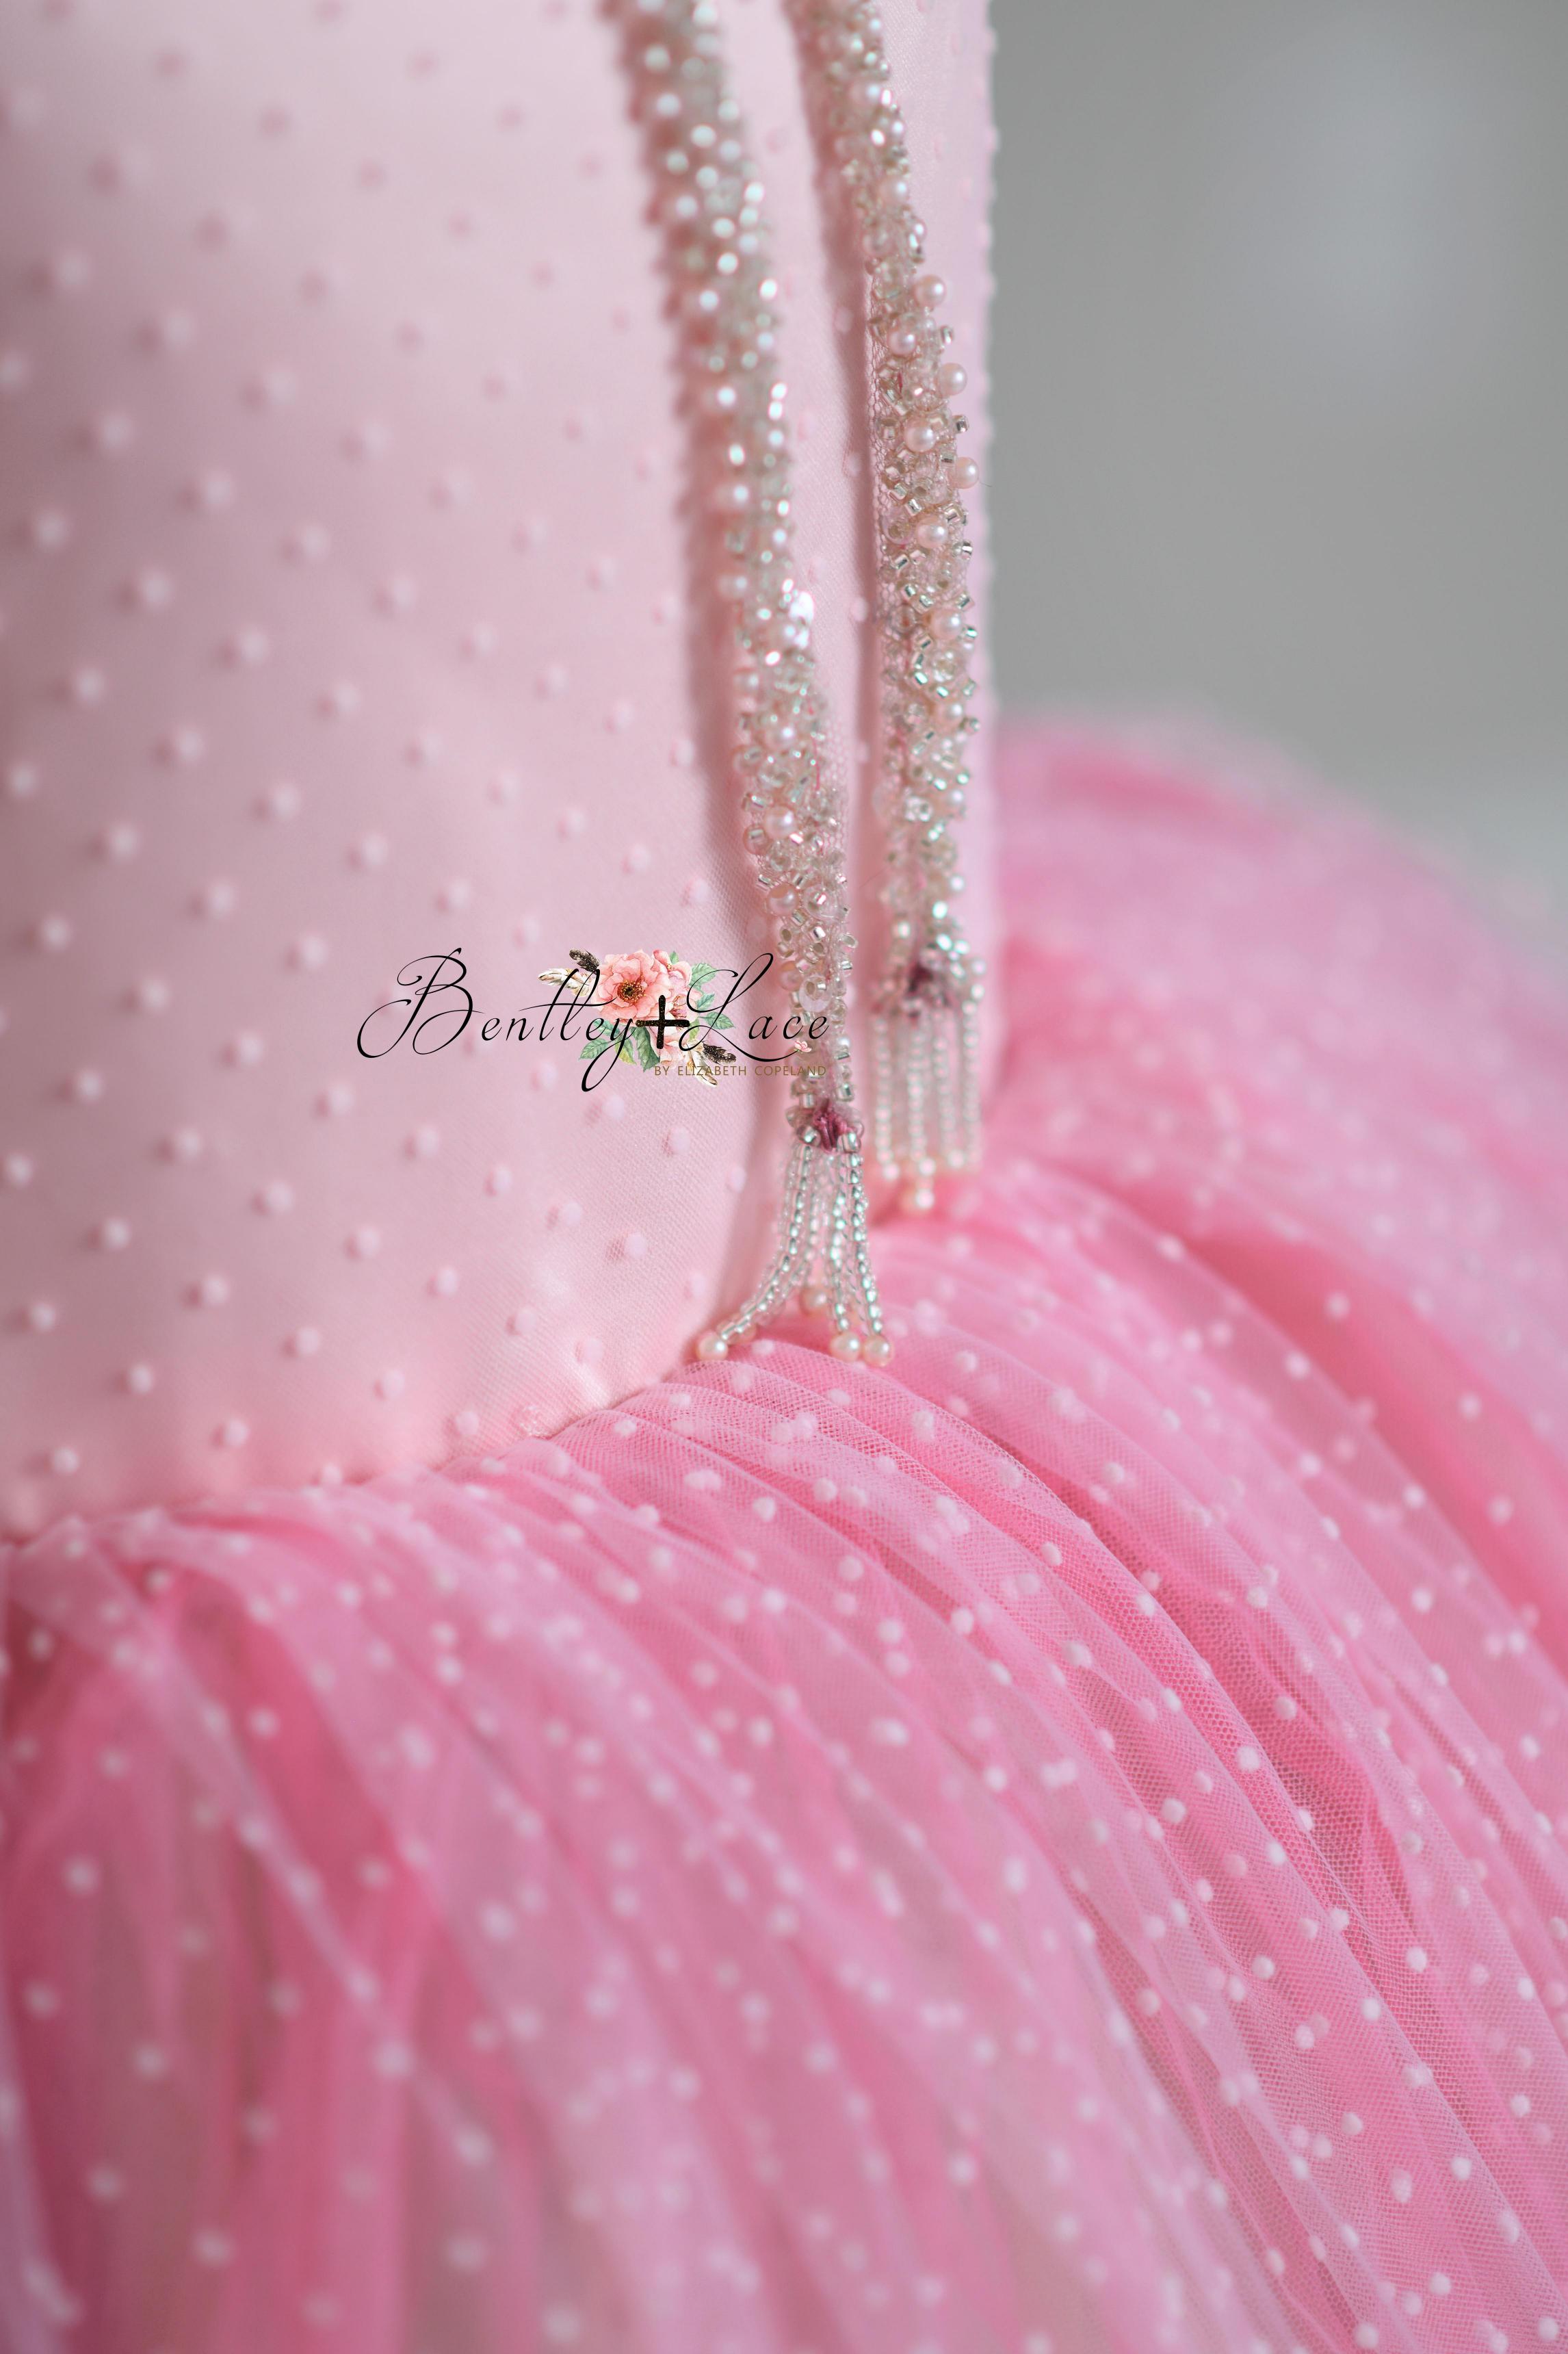 "Swish Dot" Couture Pastel  Floor length gown  ( 8 Year - Petite 11 Year)